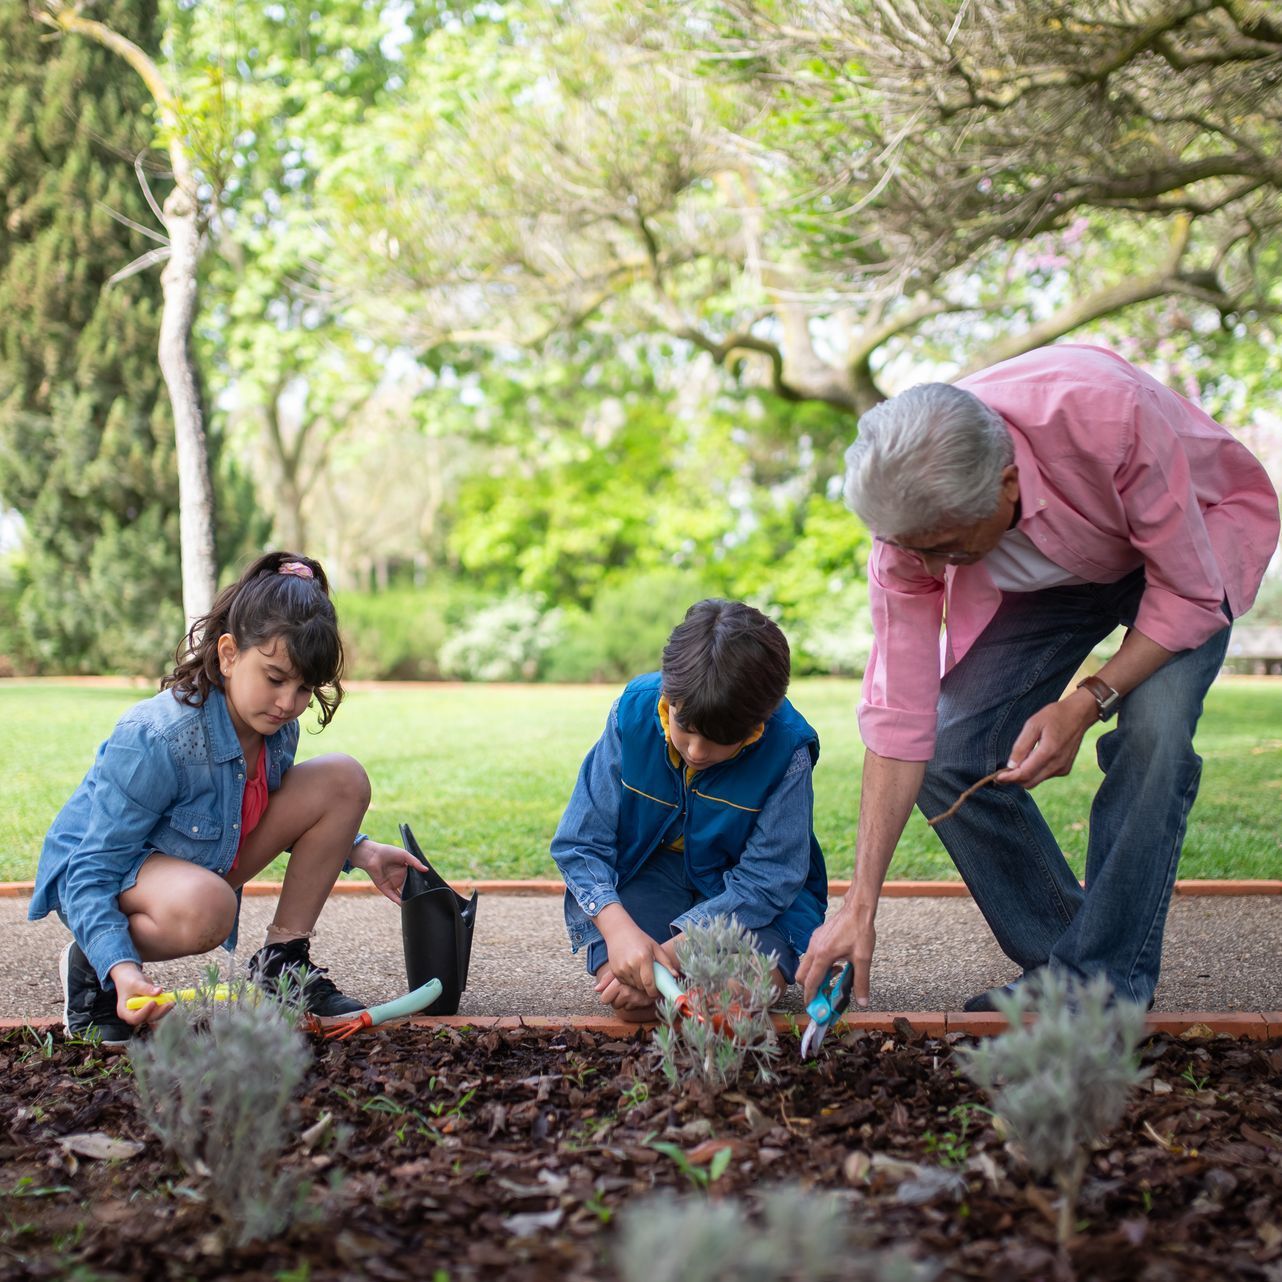 Image of two children gardening with their grandparent.